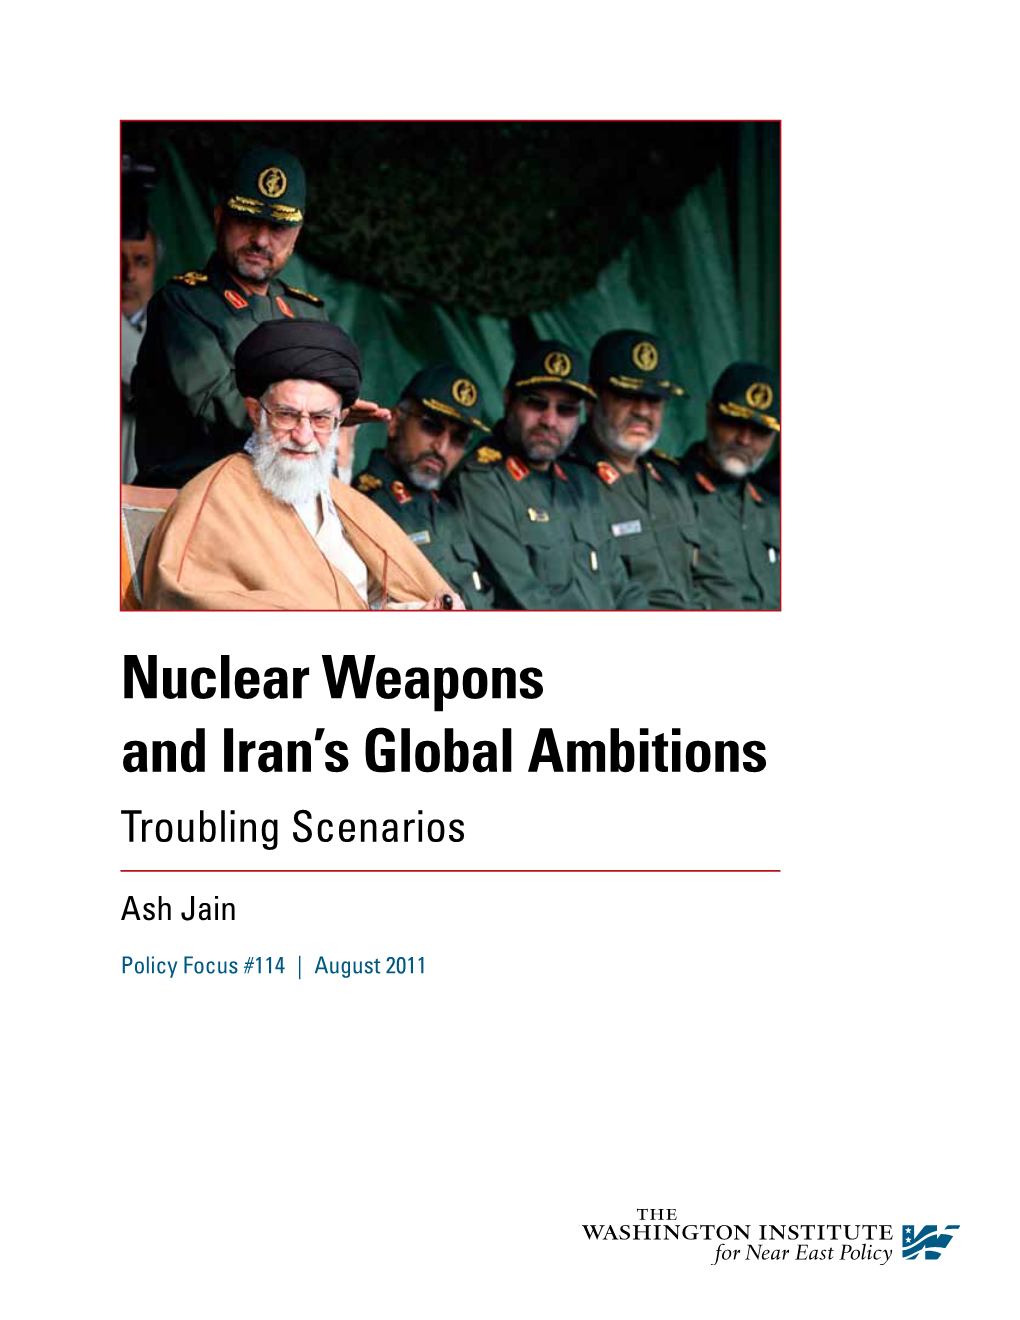 Nuclear Weapons and Iran's Global Ambitions